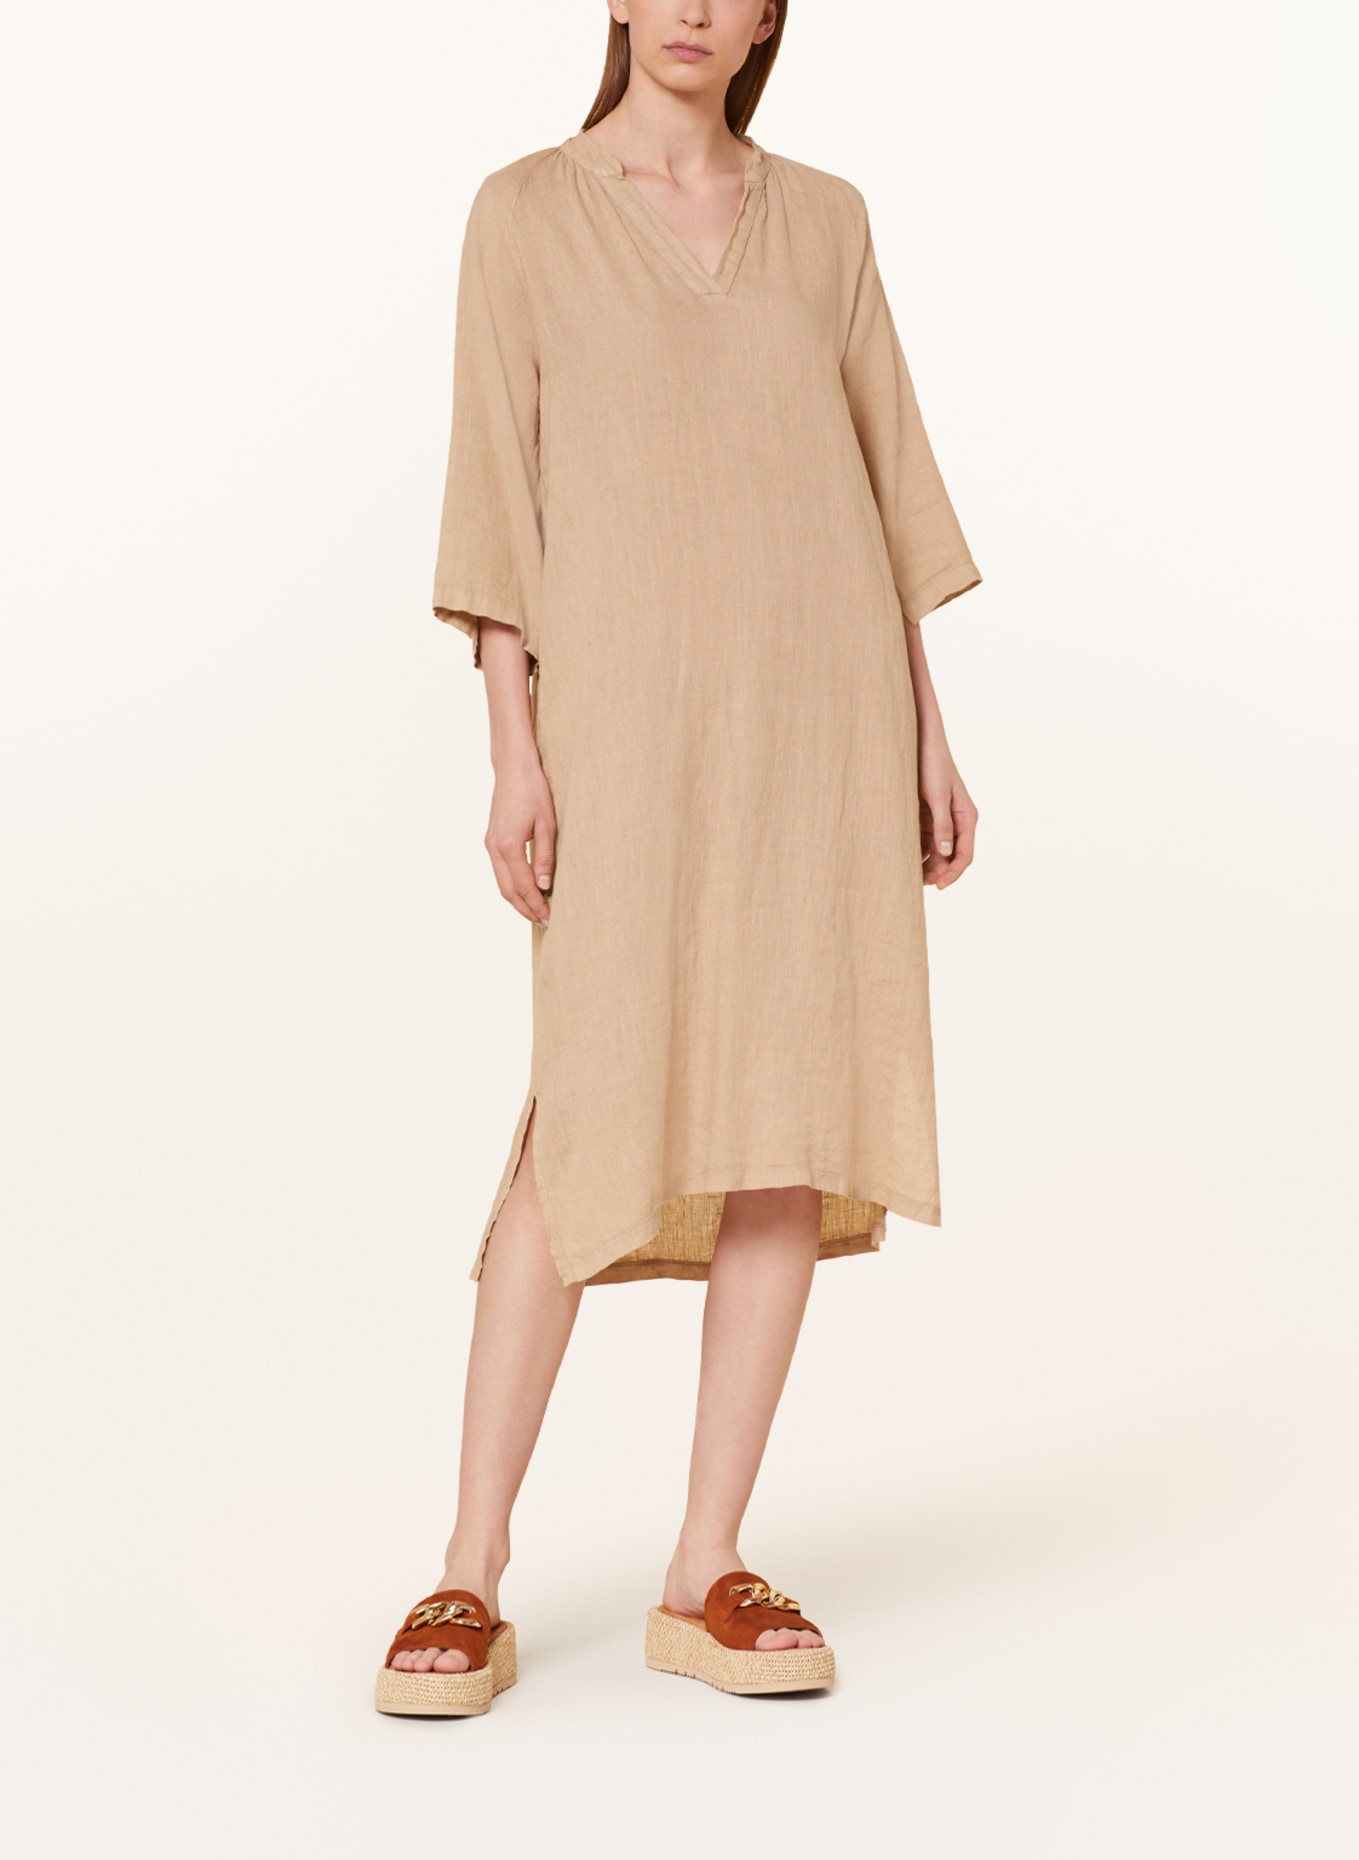 CARTOON Linen dress with 3/4 sleeves, Color: BEIGE (Image 2)